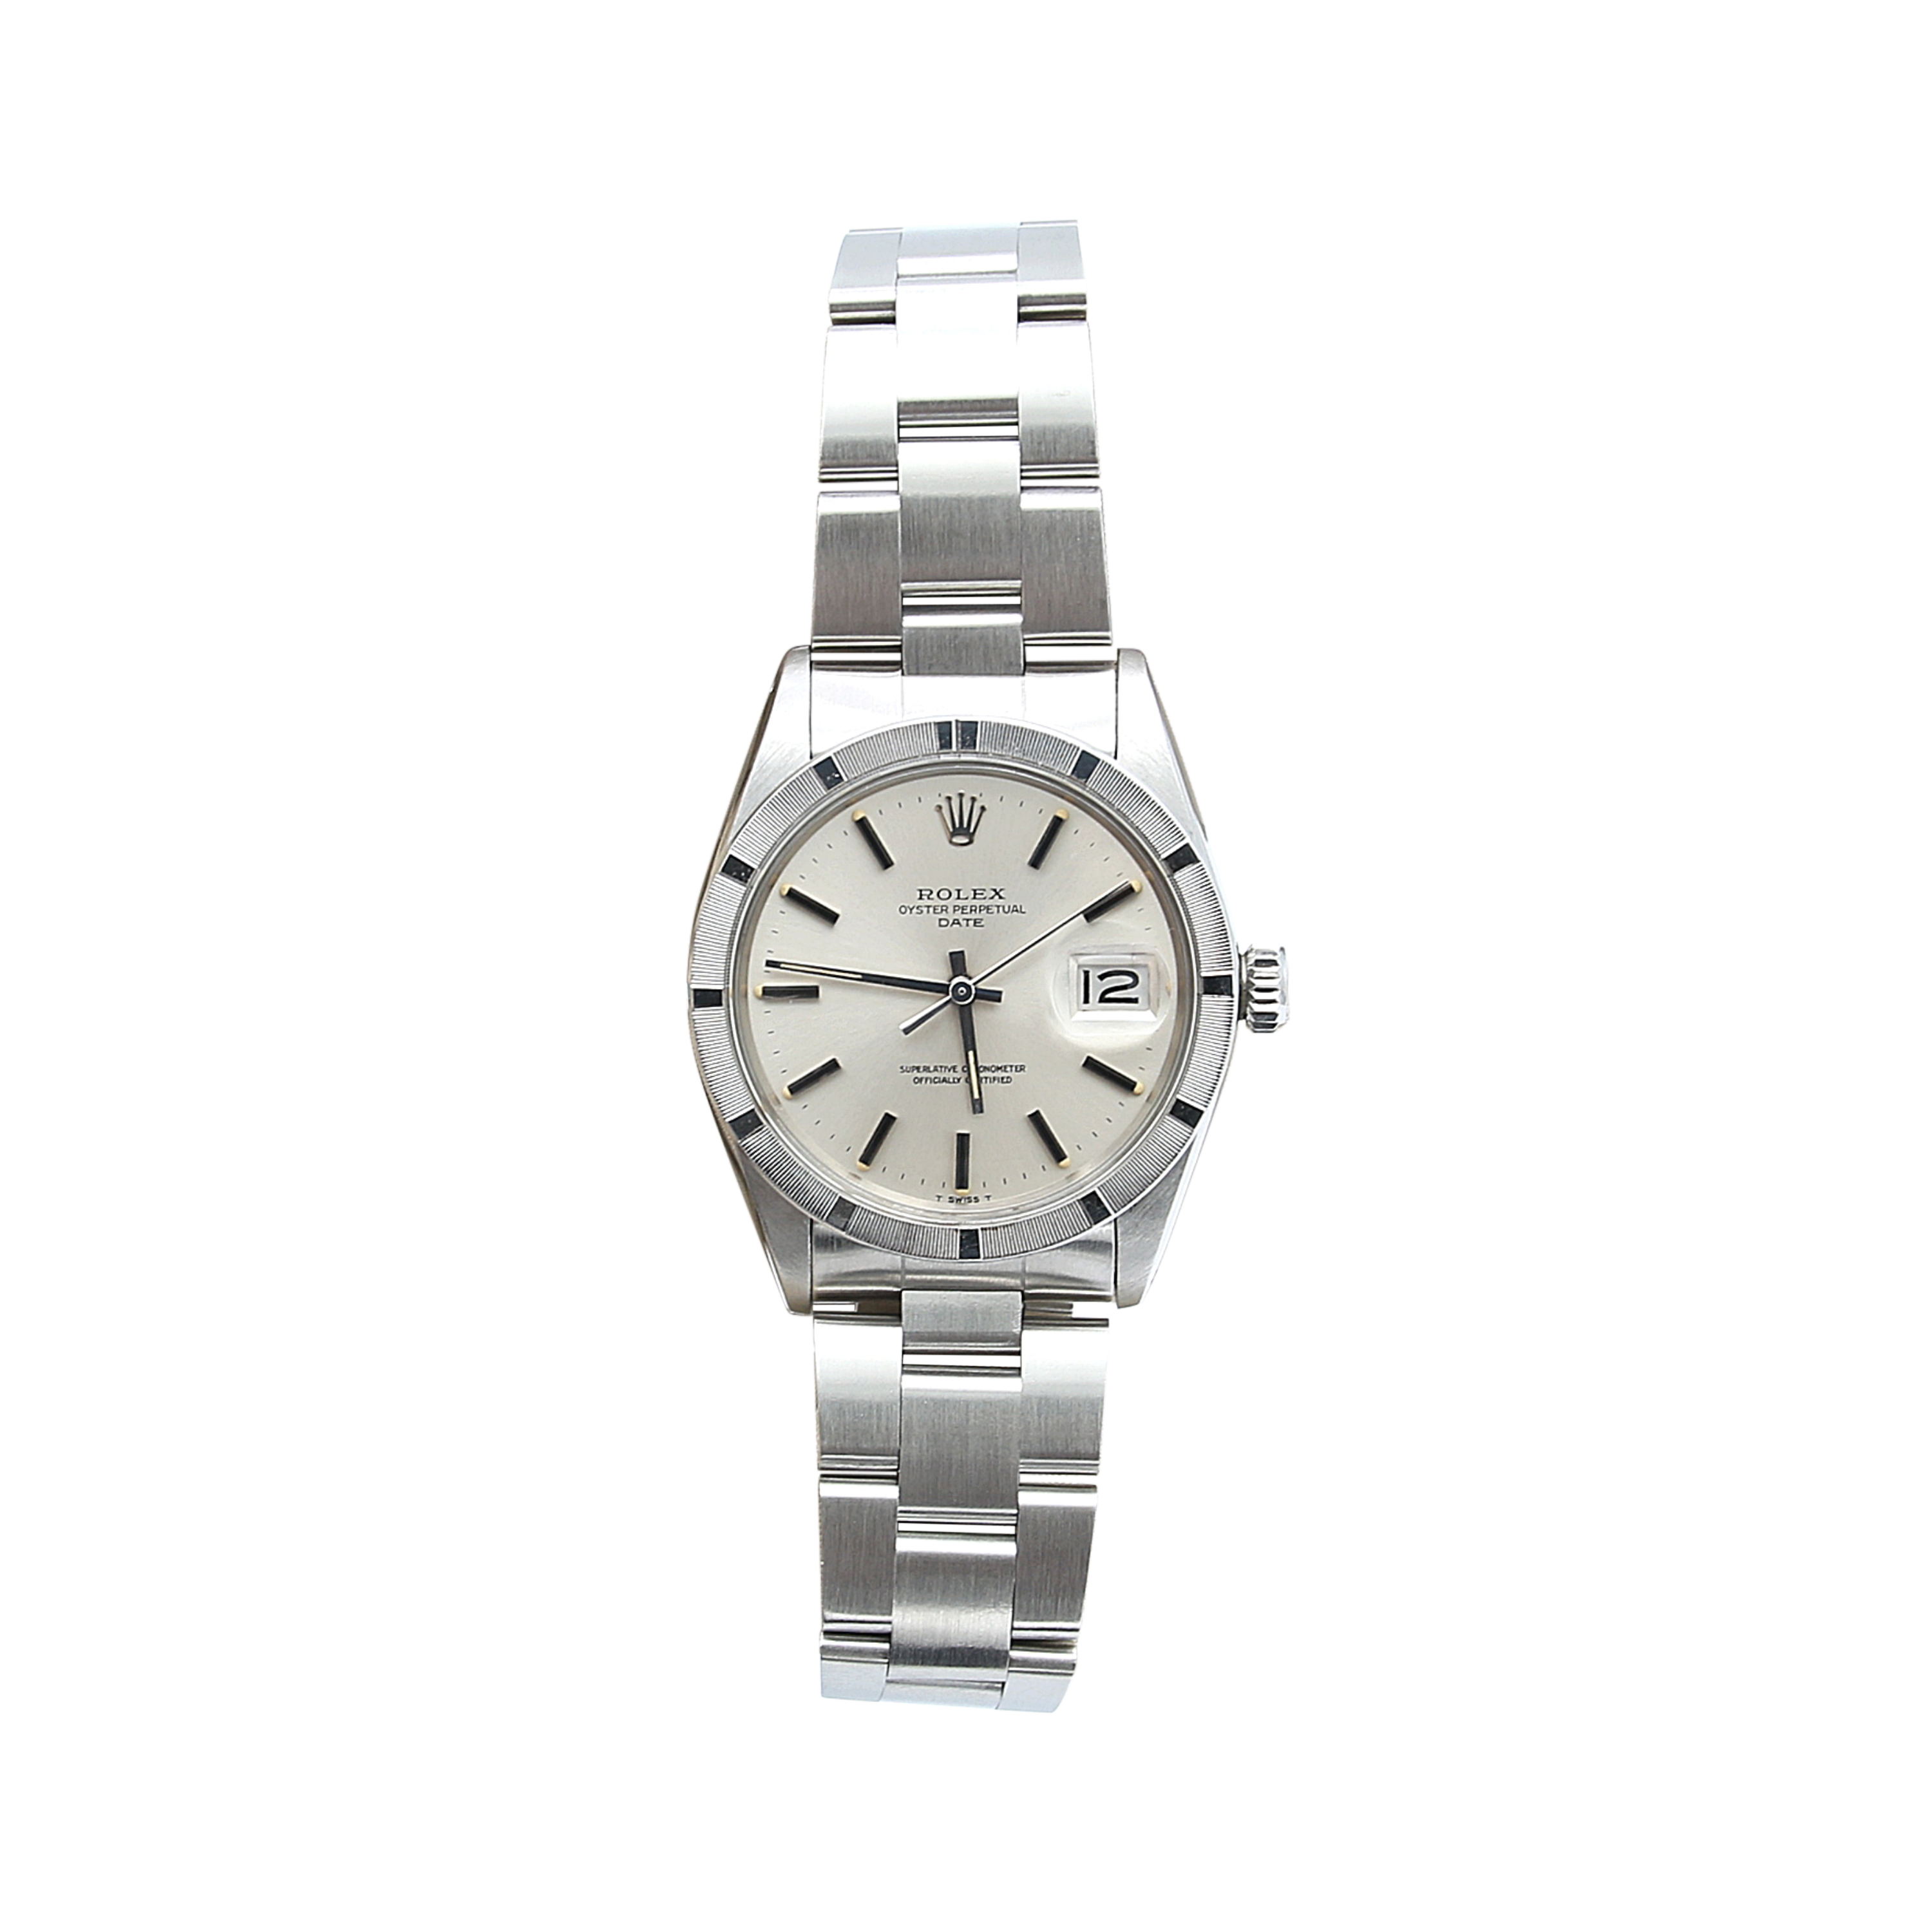 Rolex Oyster Perpetual Date ref. 1501 34mm - Silver Dial - Oyster bracelet